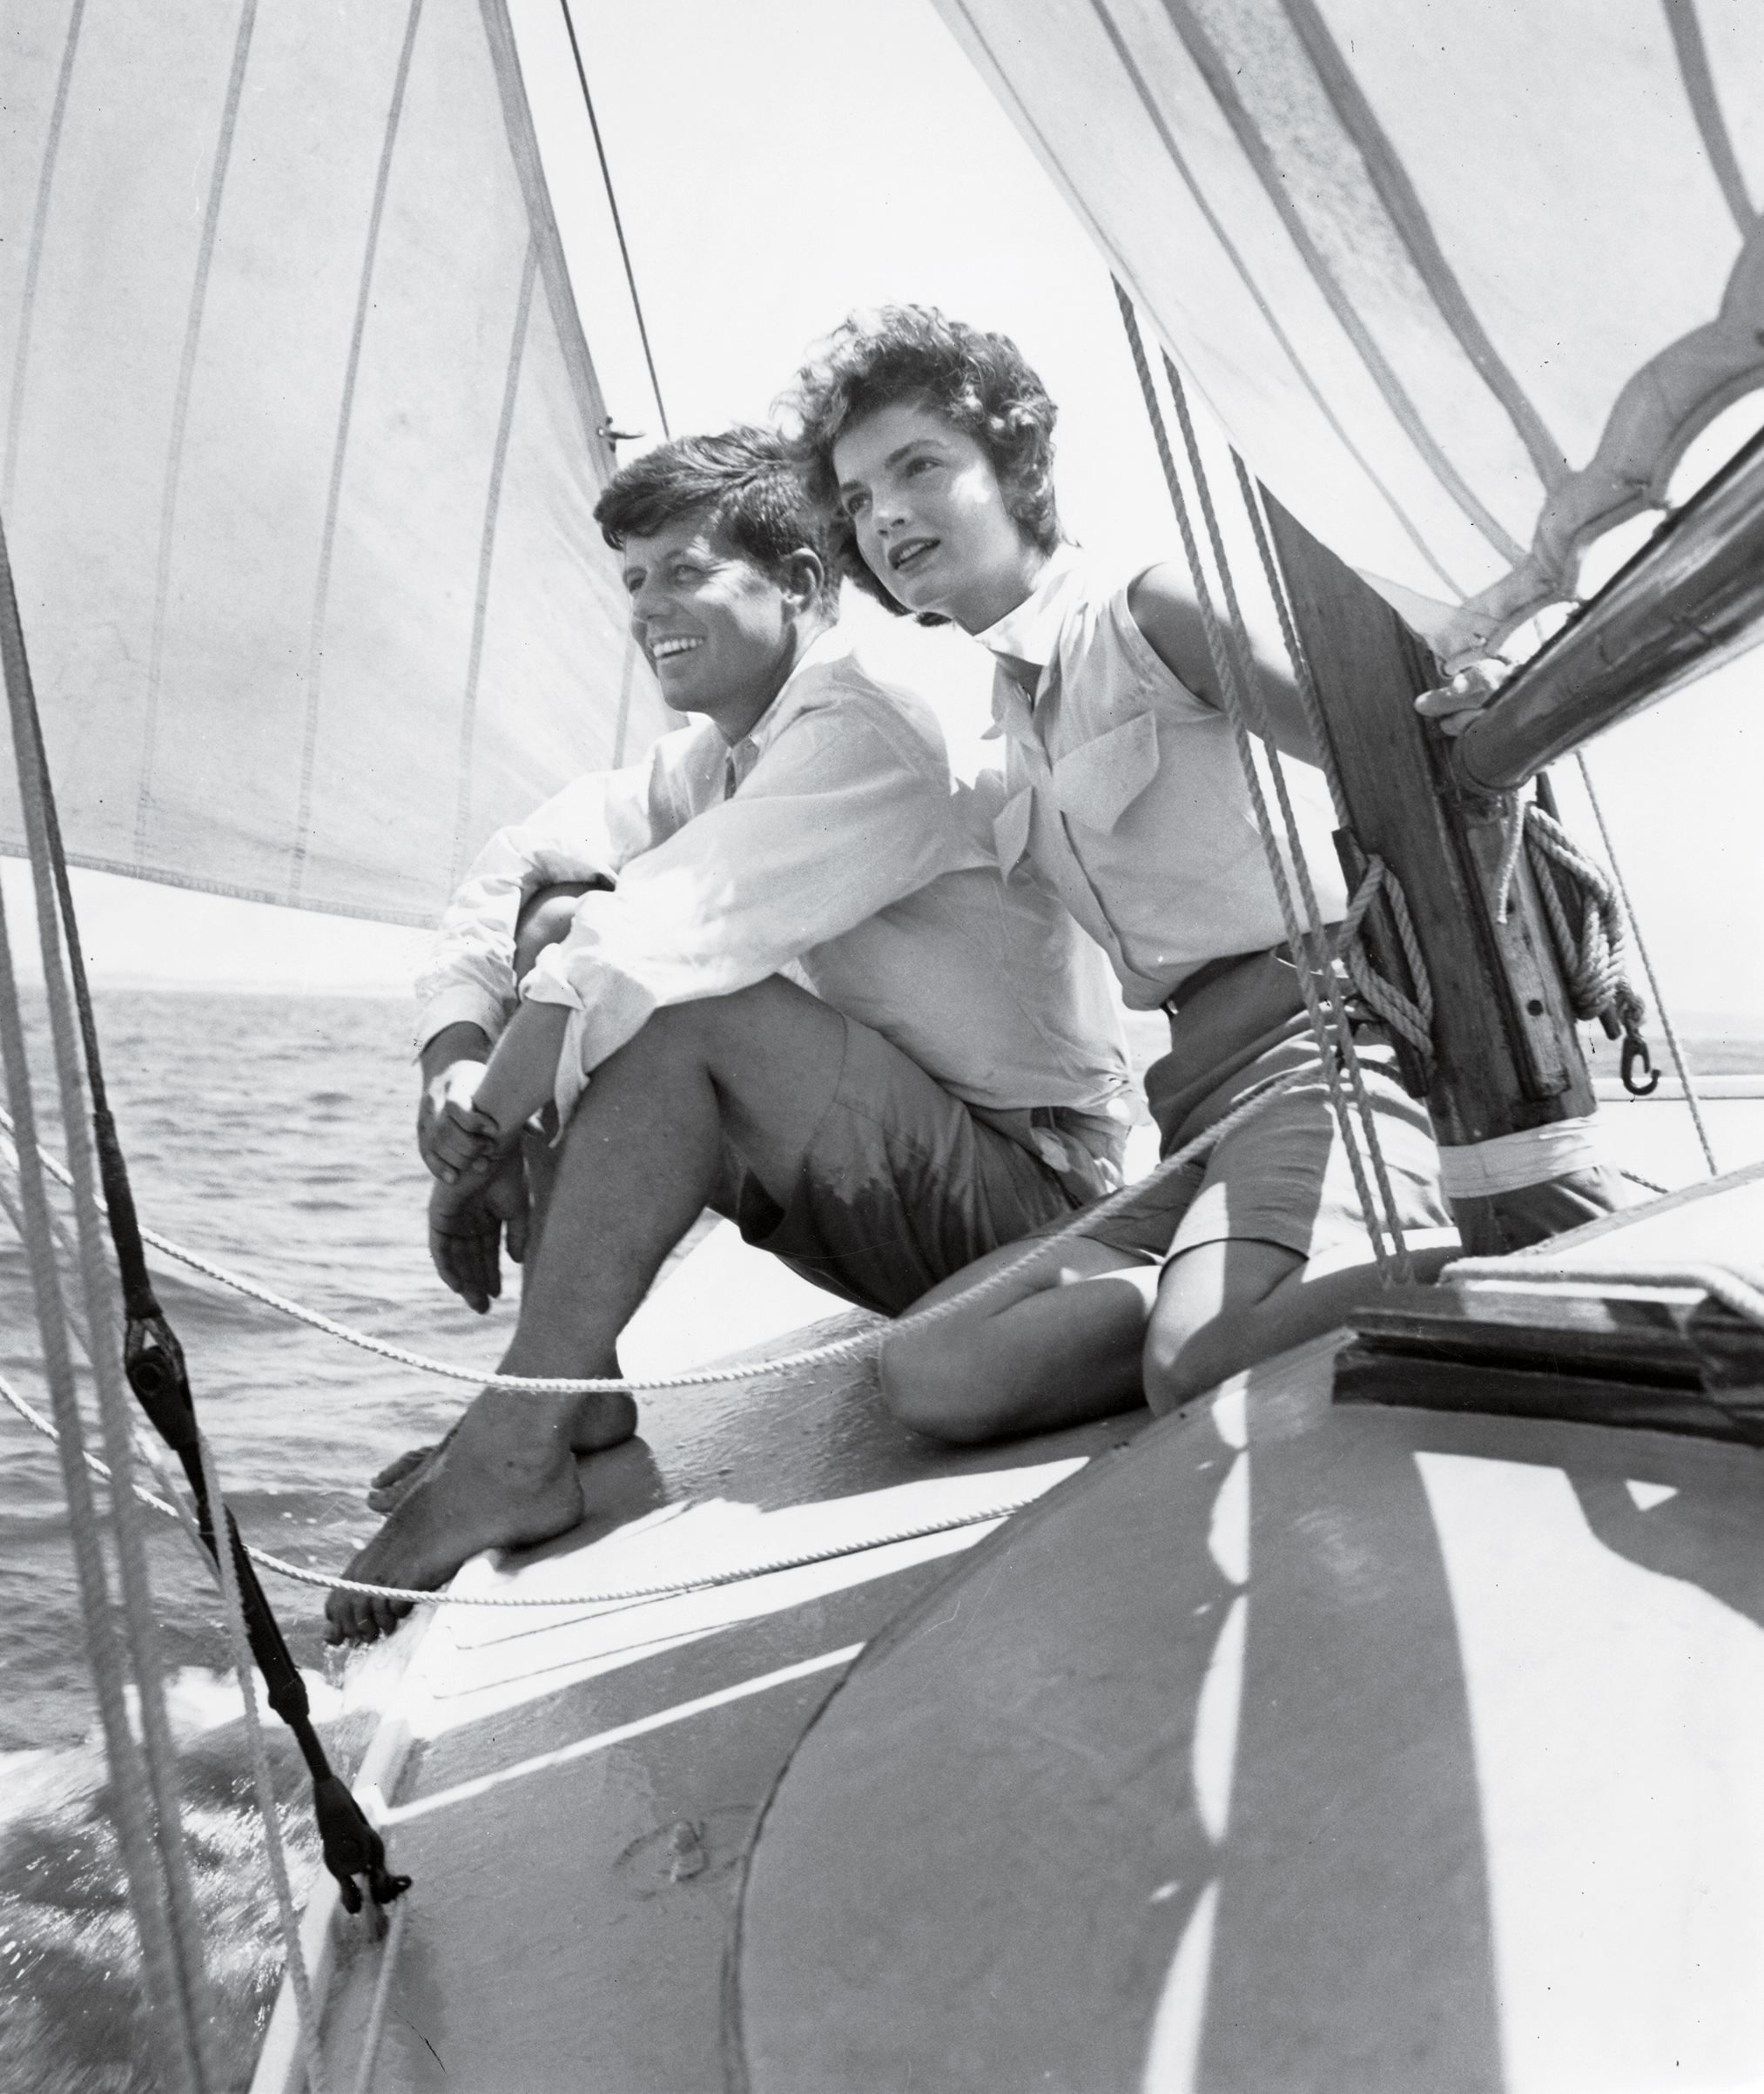 Kennedy and fiancée Jacqueline Bouvier sailing off the coast of Hyannis Port, Mass., in June 1953 (Hy Peskin&mdash;Getty Images)